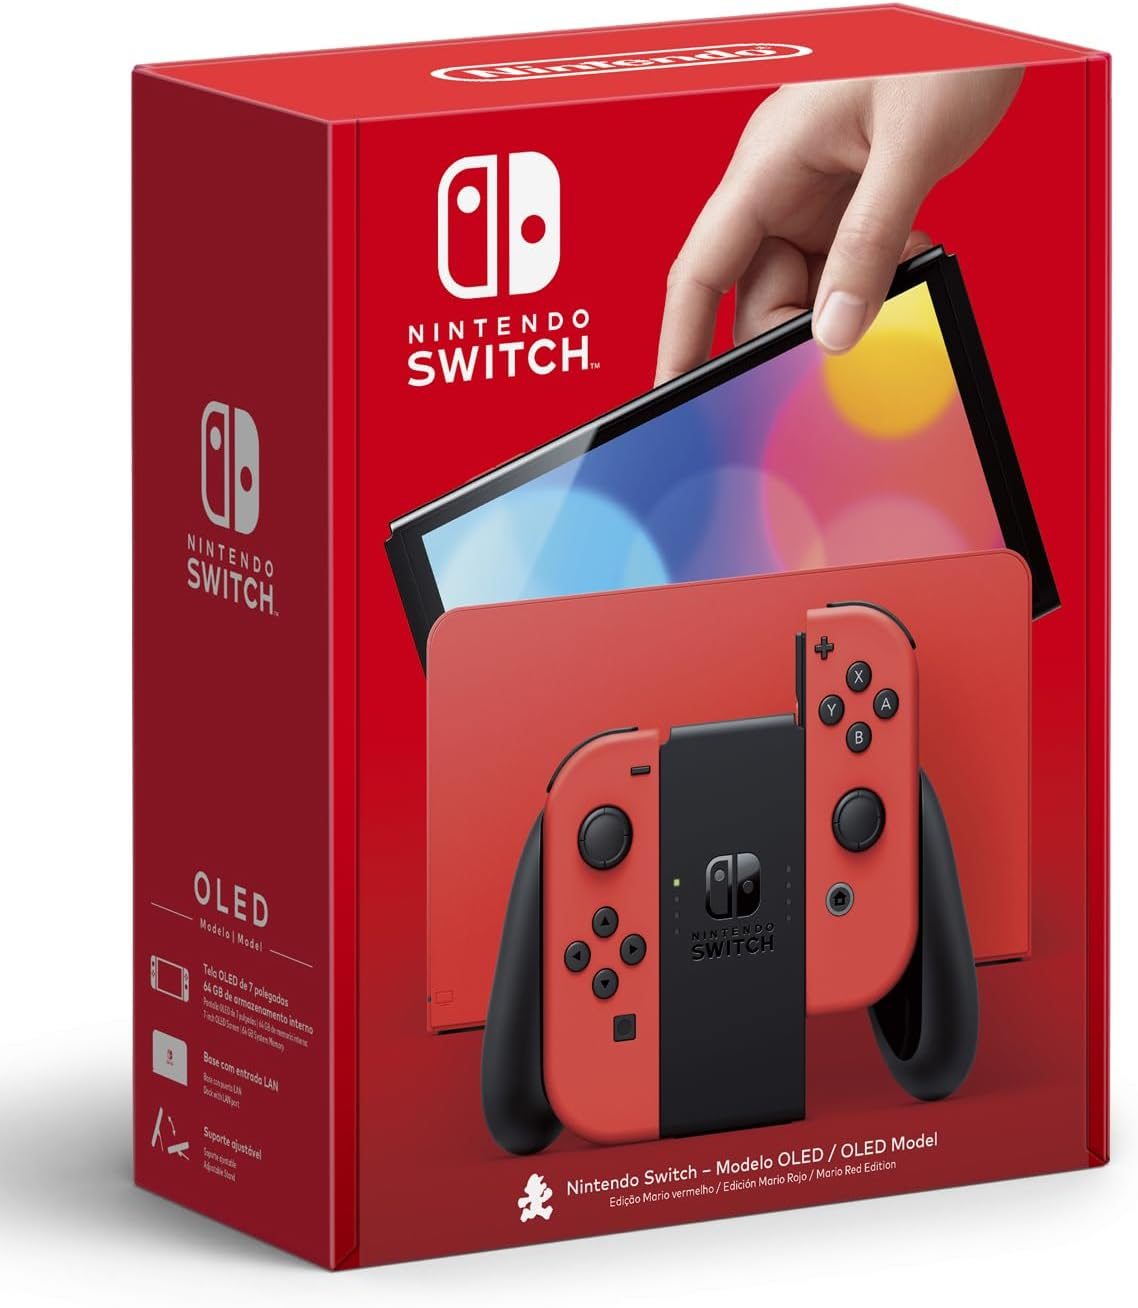  Nintendo Switch OLED Model - Mario Red Edition [BR]